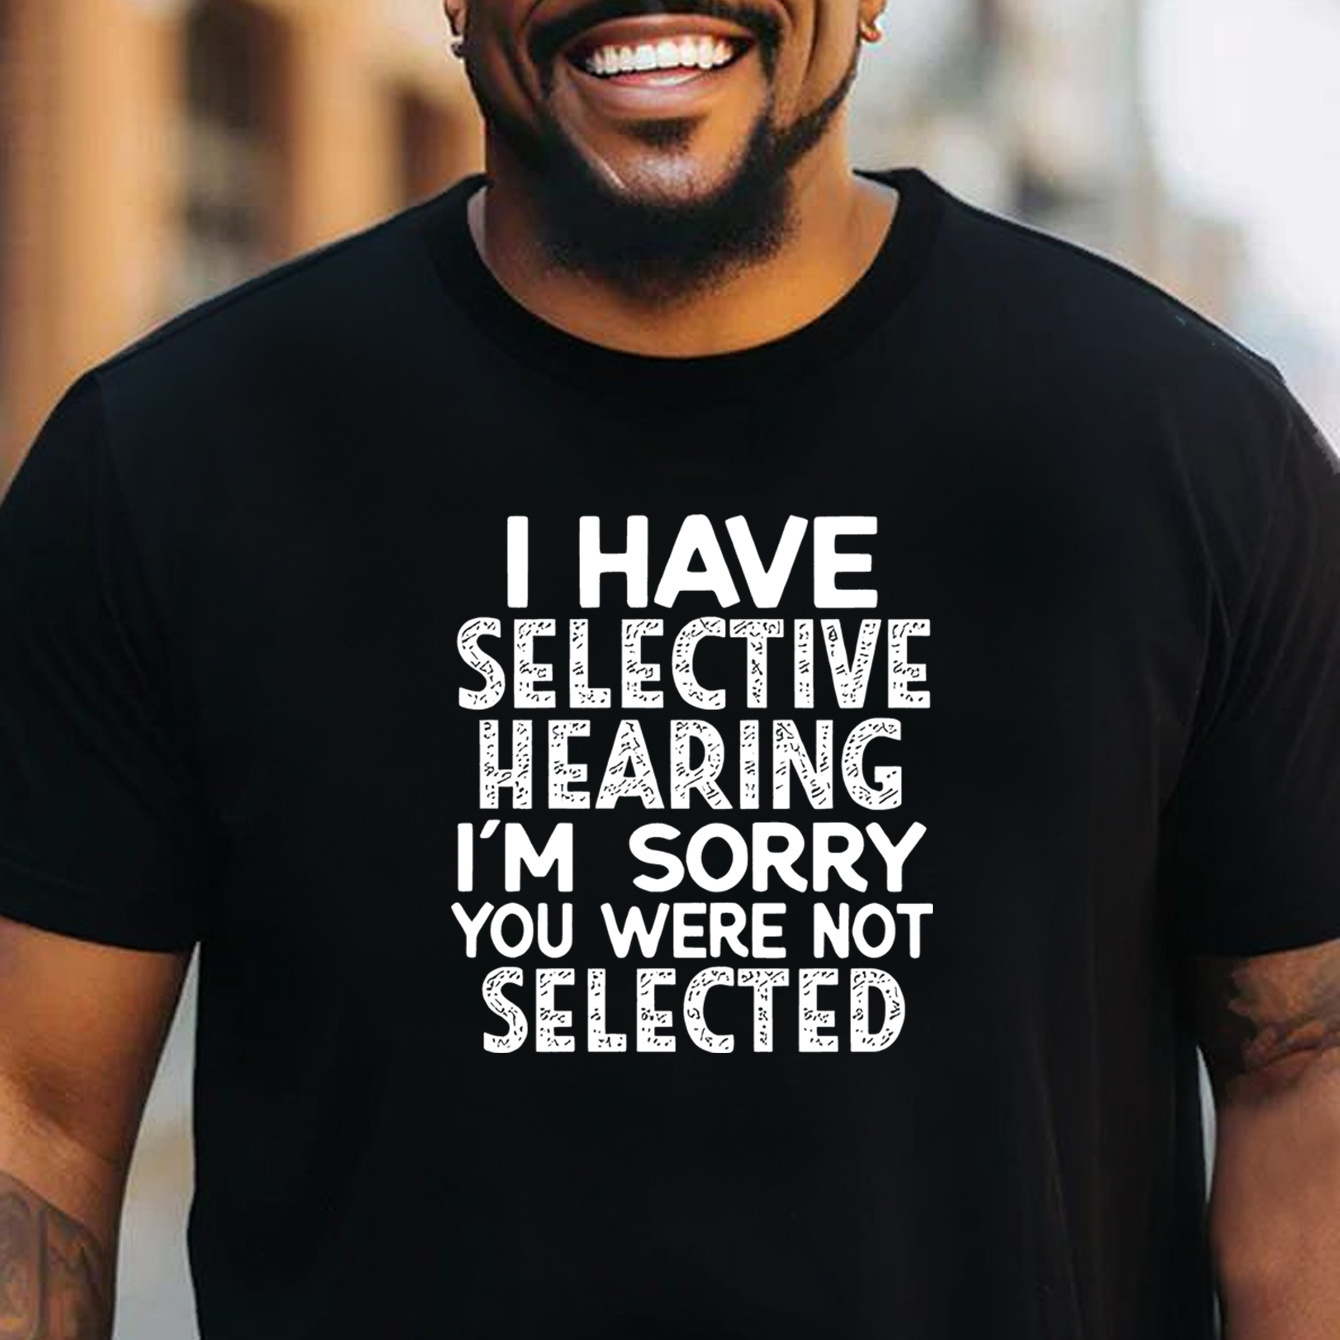 

Plus Size Men's T-shirt, "i Have Selective Hearing" Graphic Print Tees For Summer, Trendy Casual Short Sleeve Tops For Males, 1 Pc, 100% Cotton T-shirt